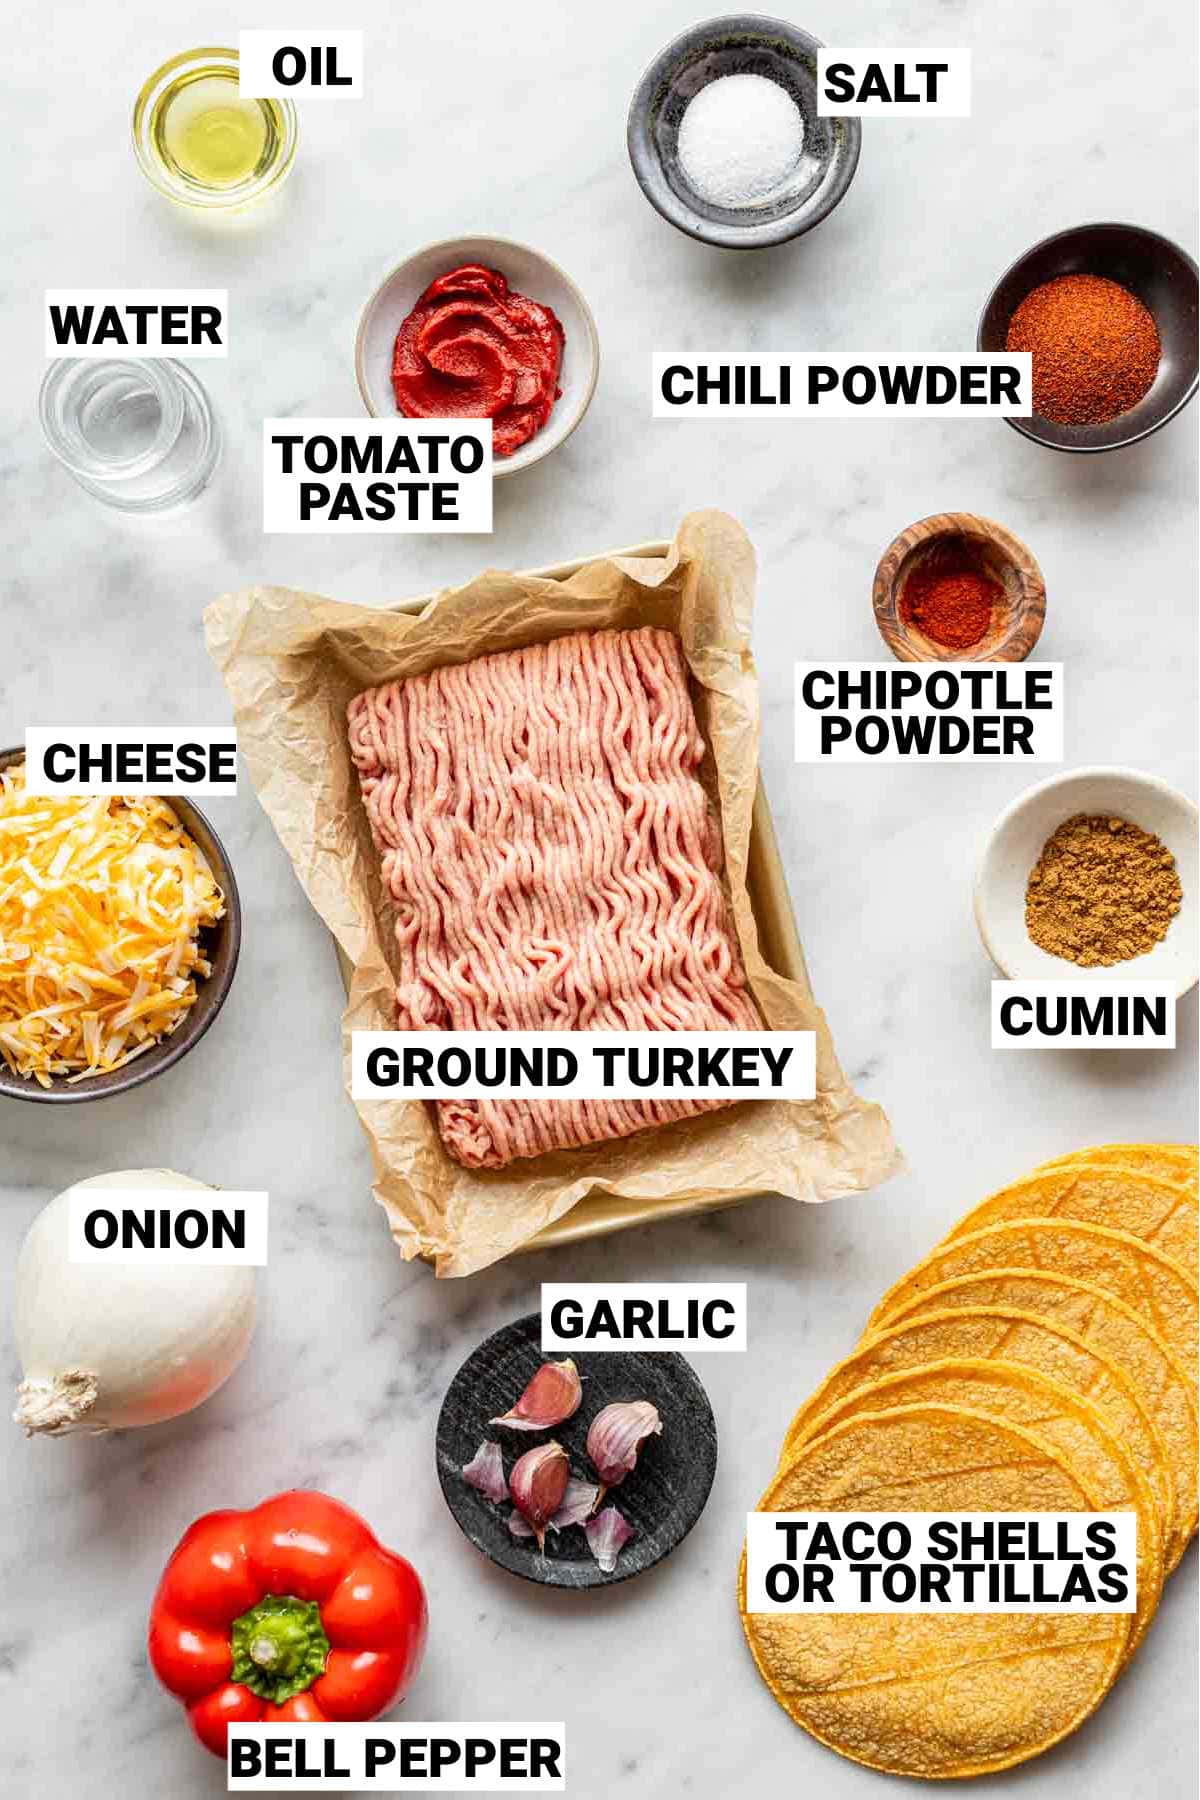 an overhead p،to of oil, salt, water, tomato paste, chili powder, chi،le powder, cheese, ground turkey, ،in, garlic, onion, bell pepper, and taco s،s to make turkey tacos